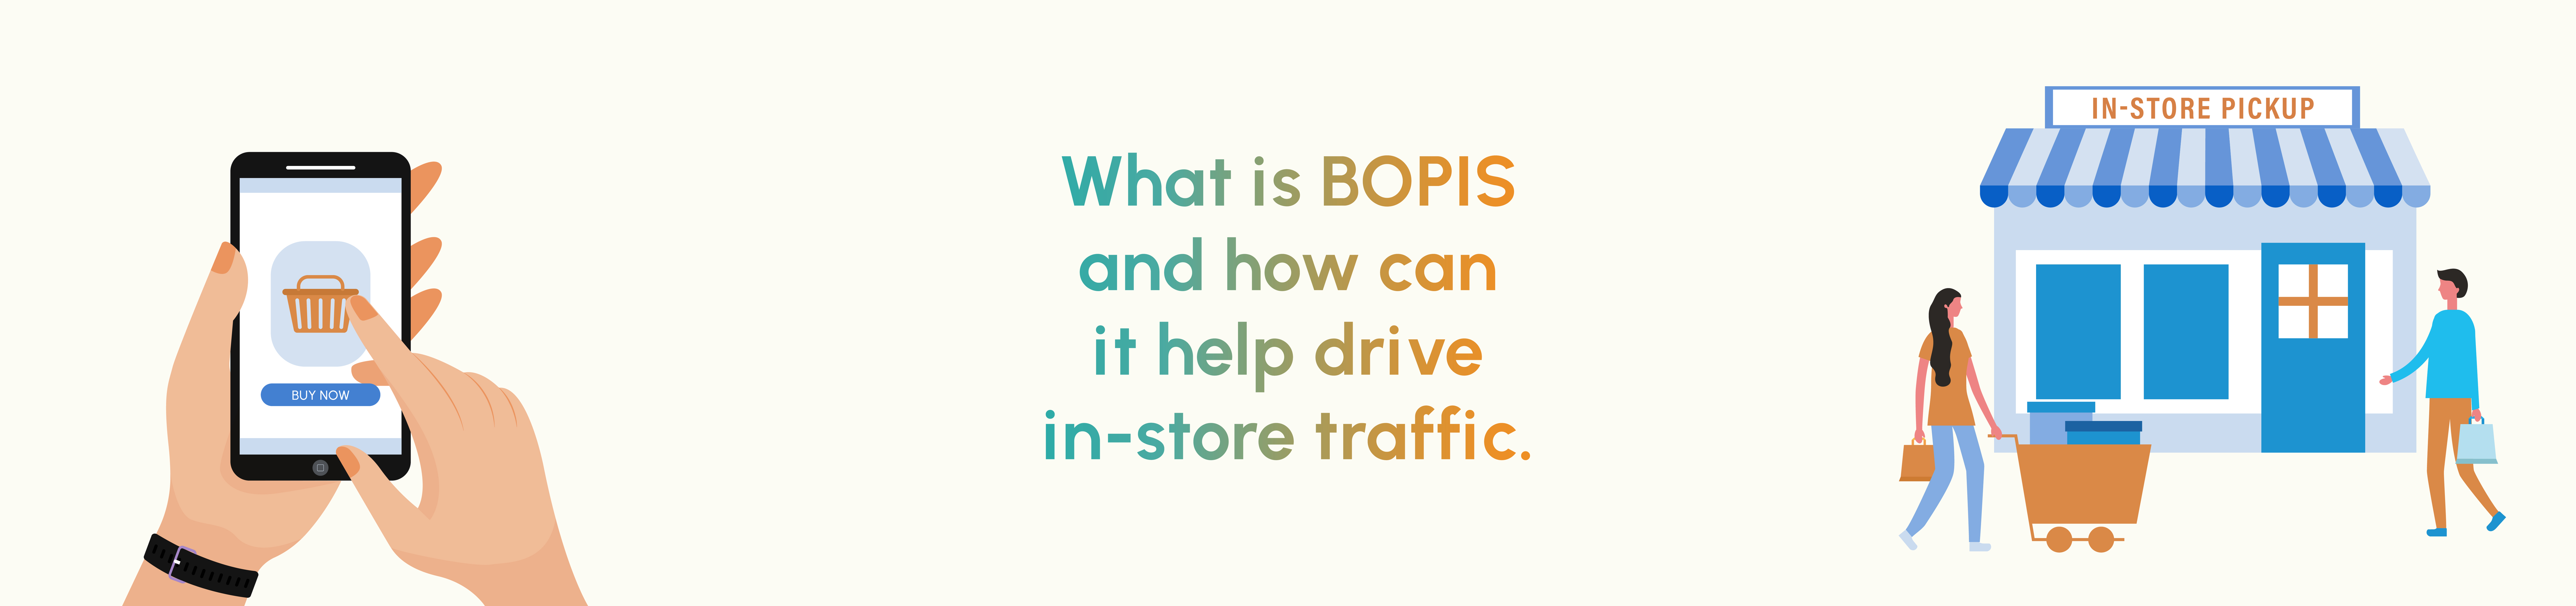 Img : What is BOPIS and how can it help drive in-store traffic